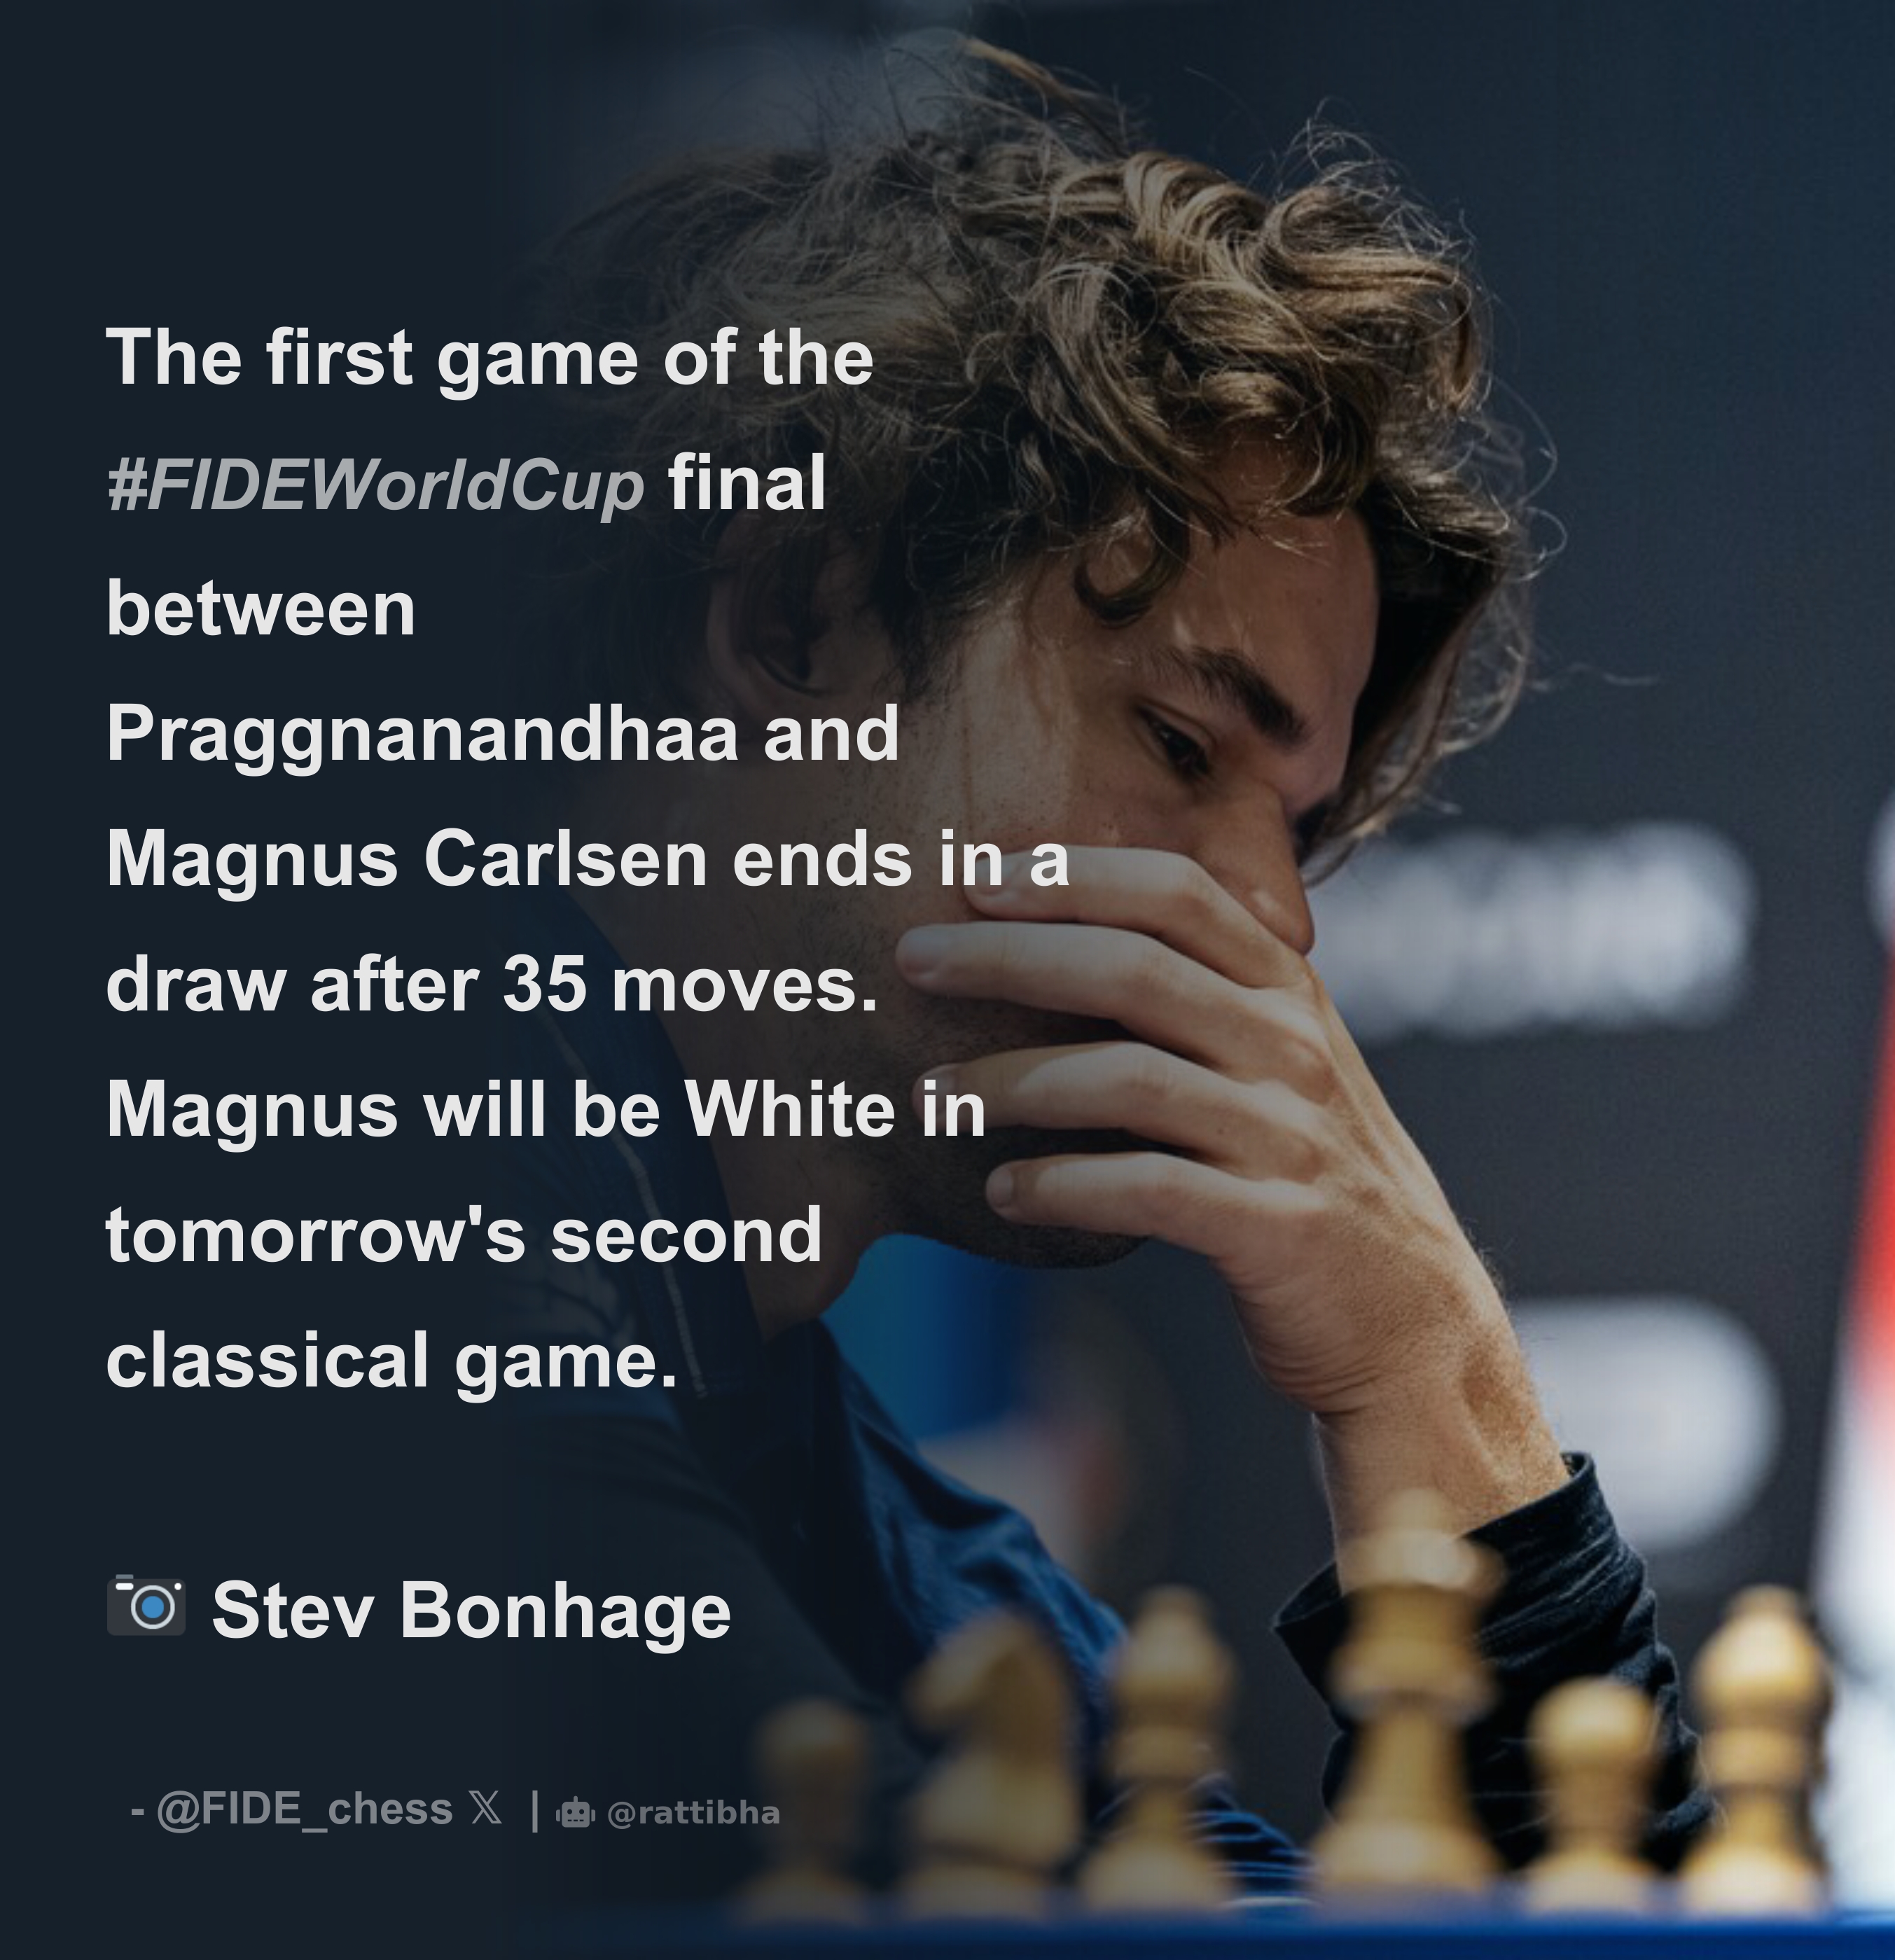 FIDE - International Chess Federation - After the draw between